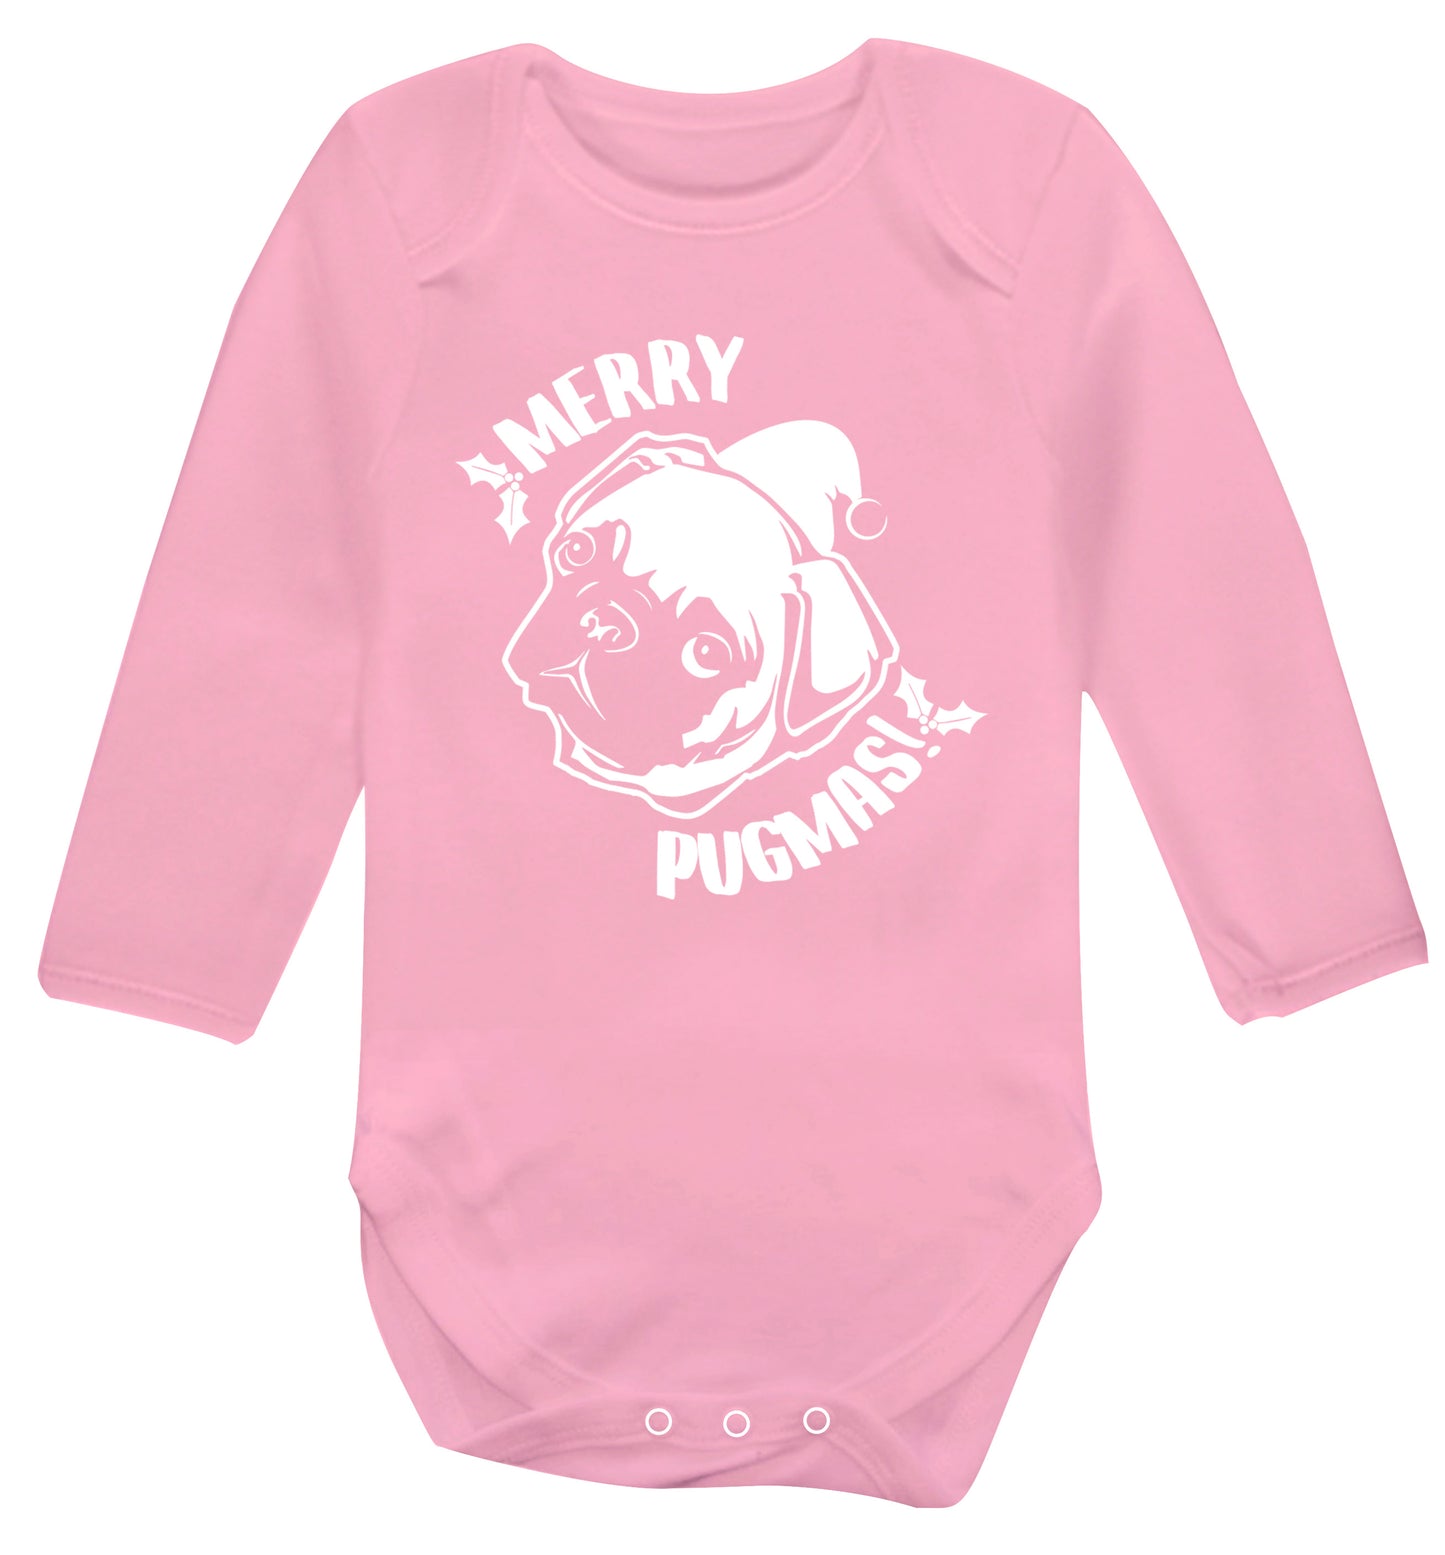 Merry Pugmas Baby Vest long sleeved pale pink 6-12 months